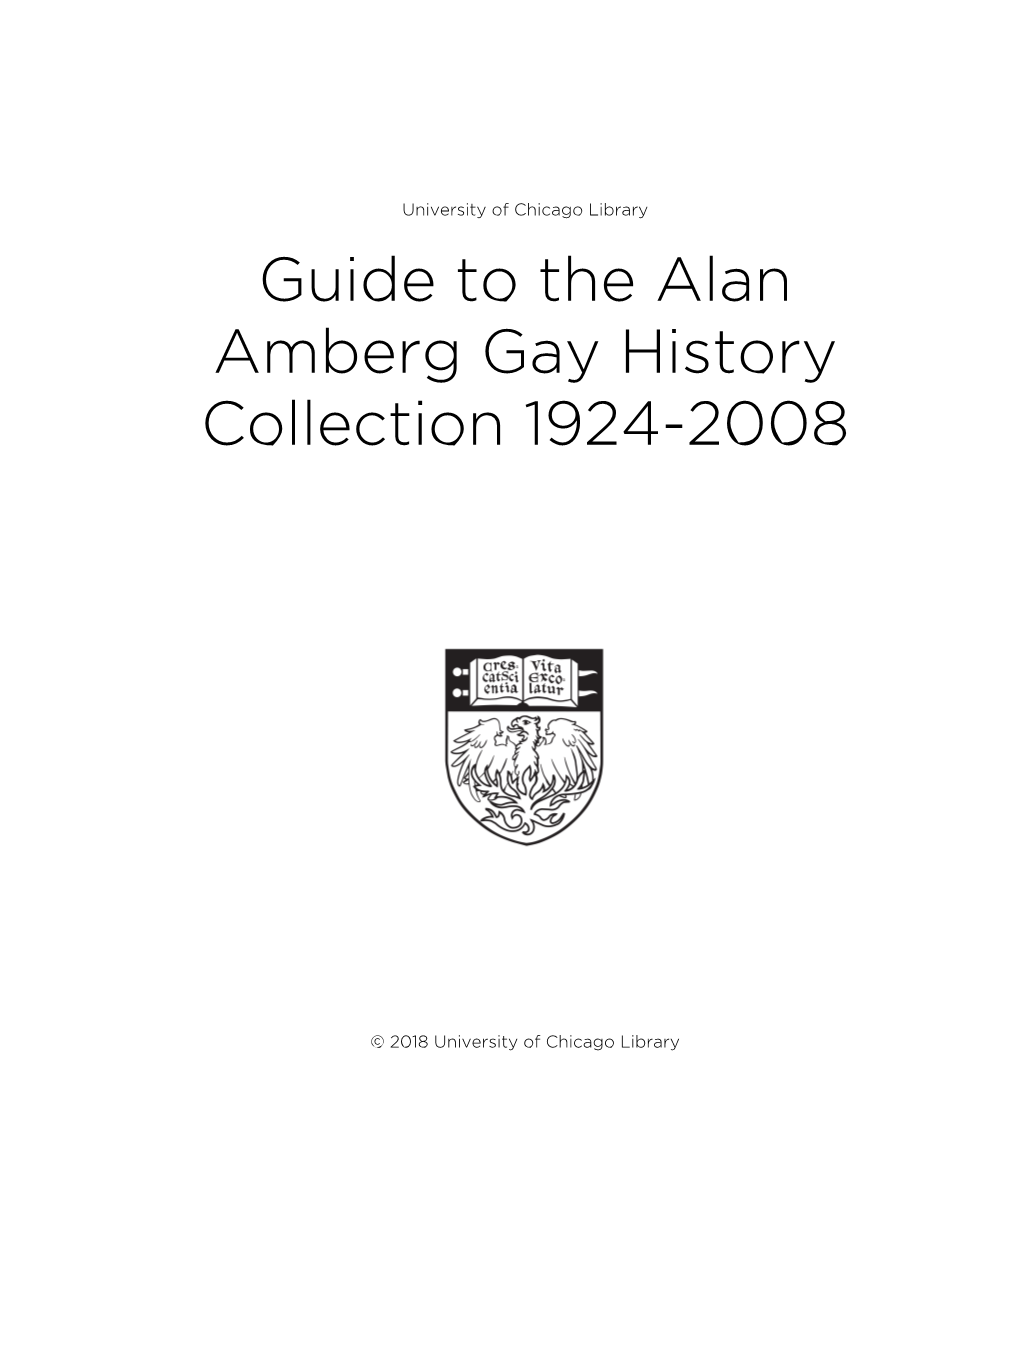 Guide to the Alan Amberg Gay History Collection 1924-2008